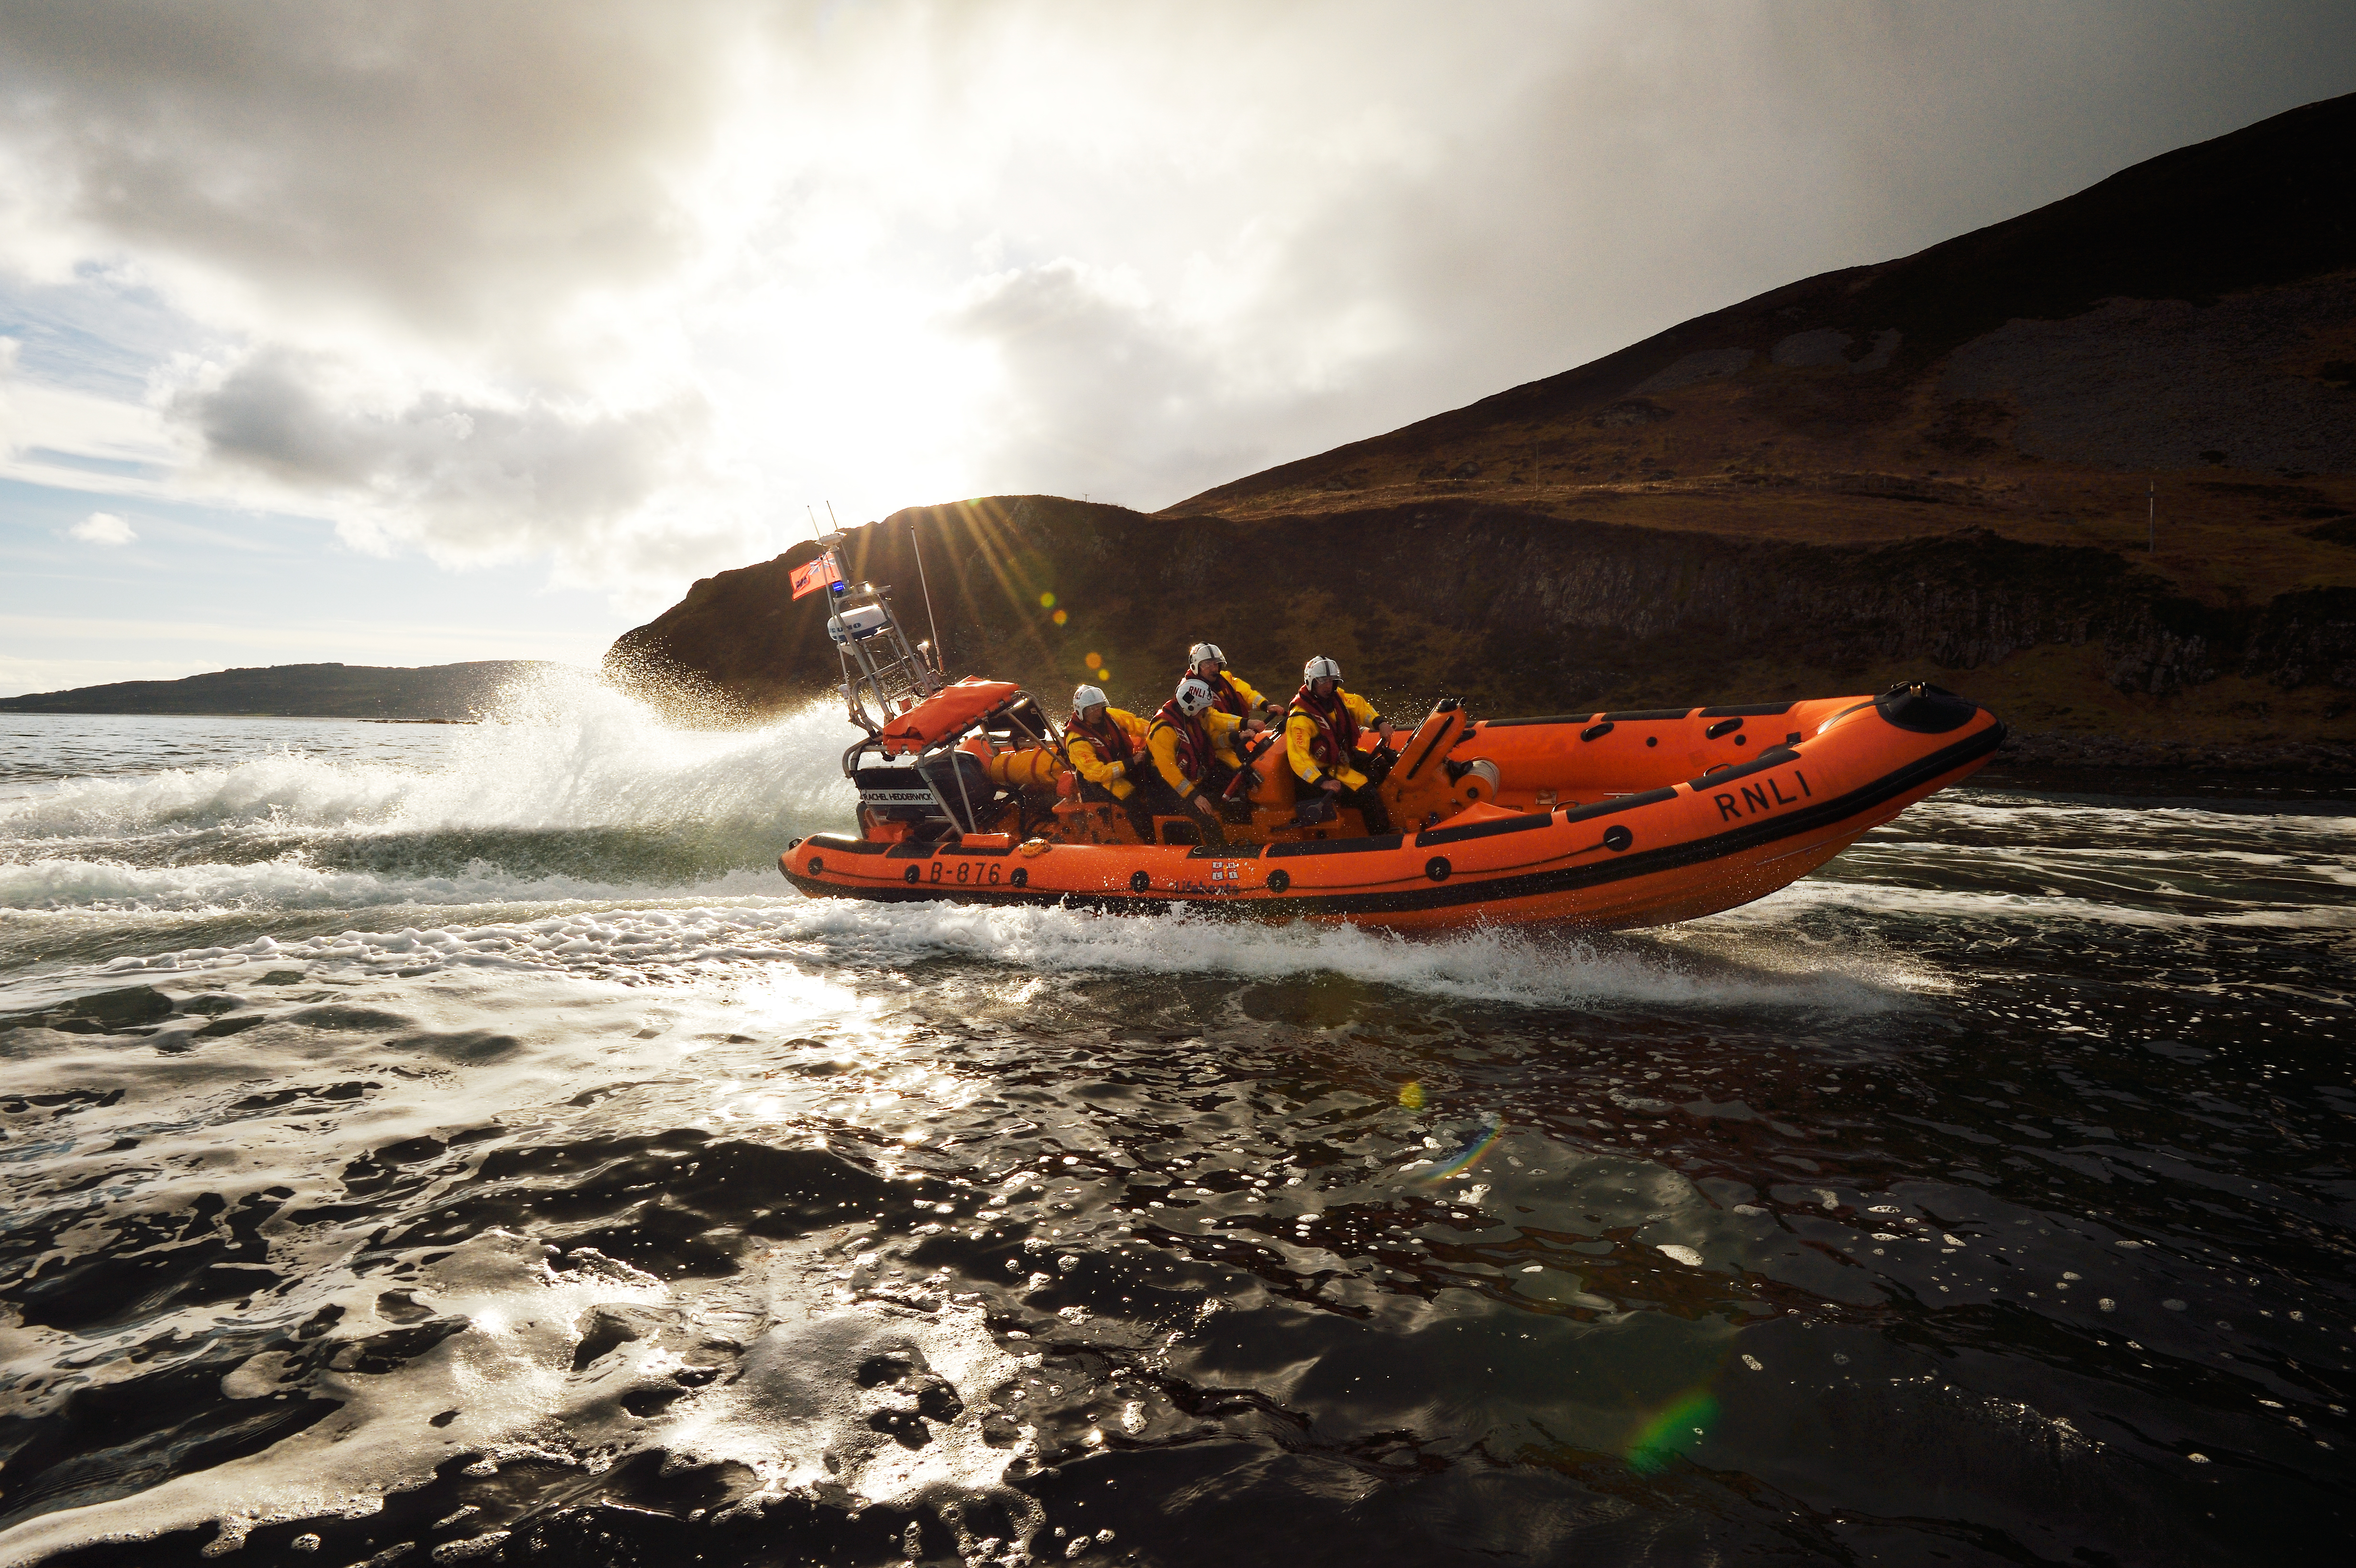 “Arran RNLI’s volunteer inshore lifeboat crew (ILB) out on exercise in their Atlantic 85, the same class of lifeboat soon to be received by Stonehaven’s crew”